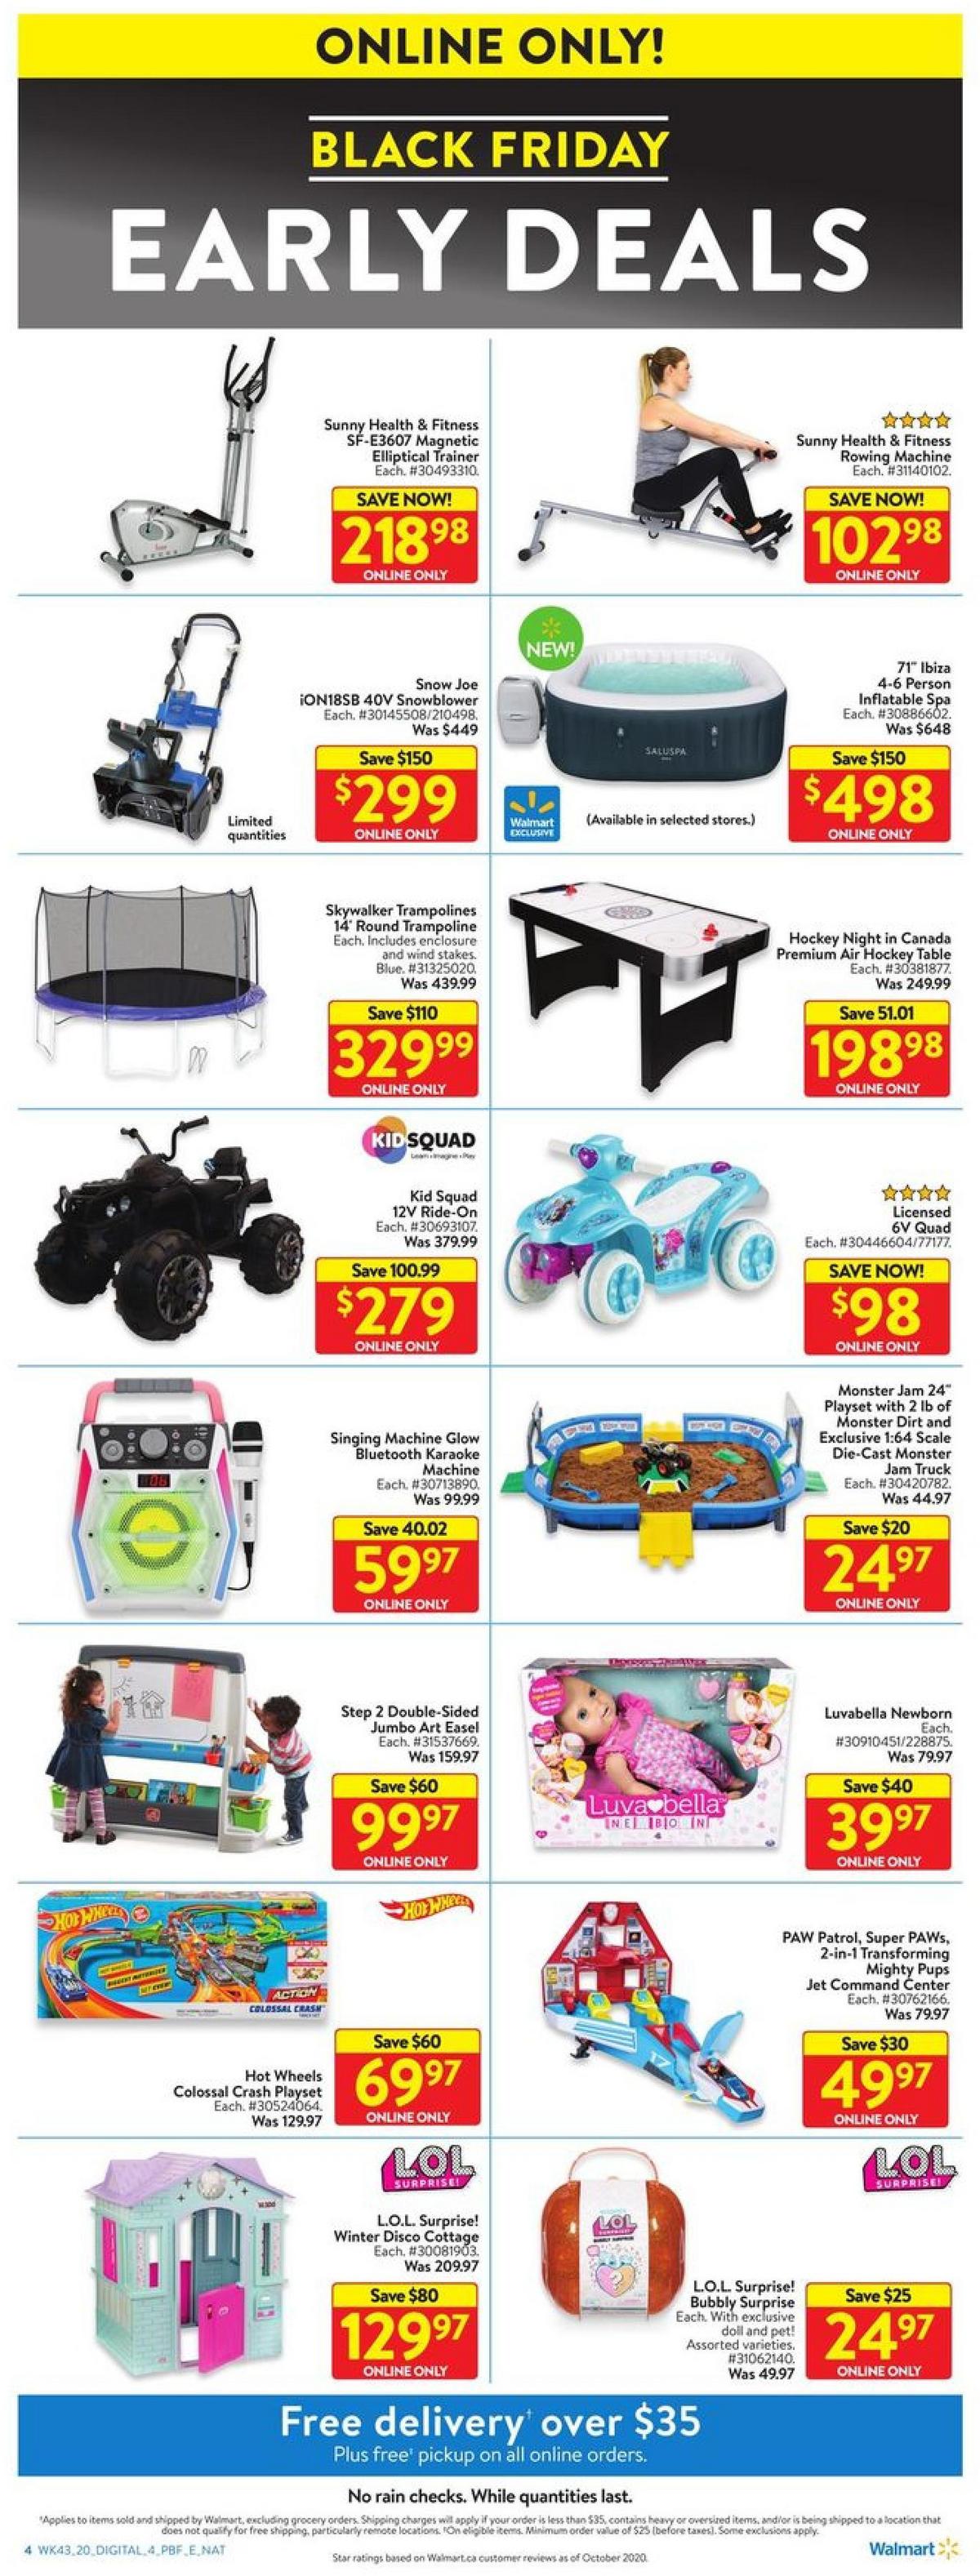 Walmart Black Friday Early Deals Flyer from November 19